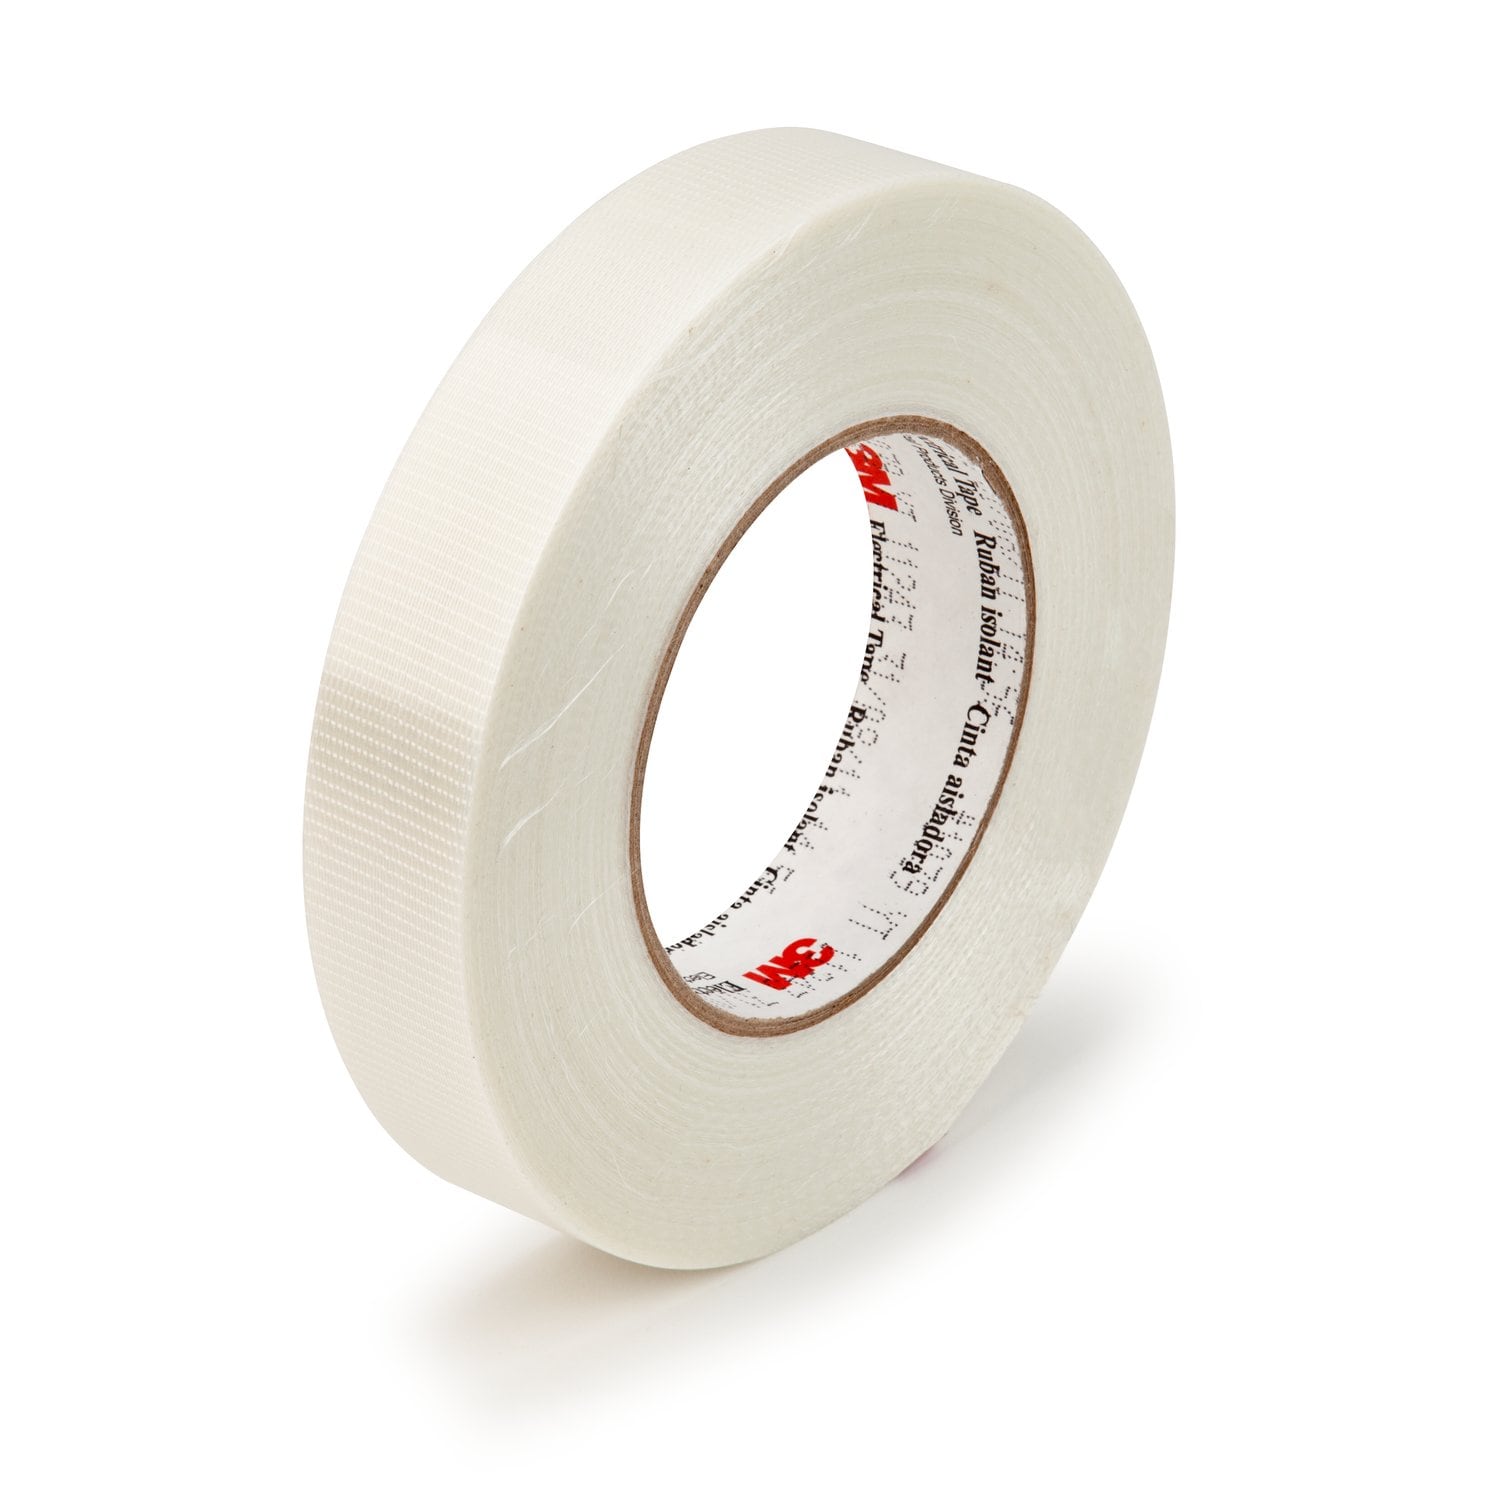 7100132417 - 3M Filament-Reinforced Electrical Tape 1039, Config